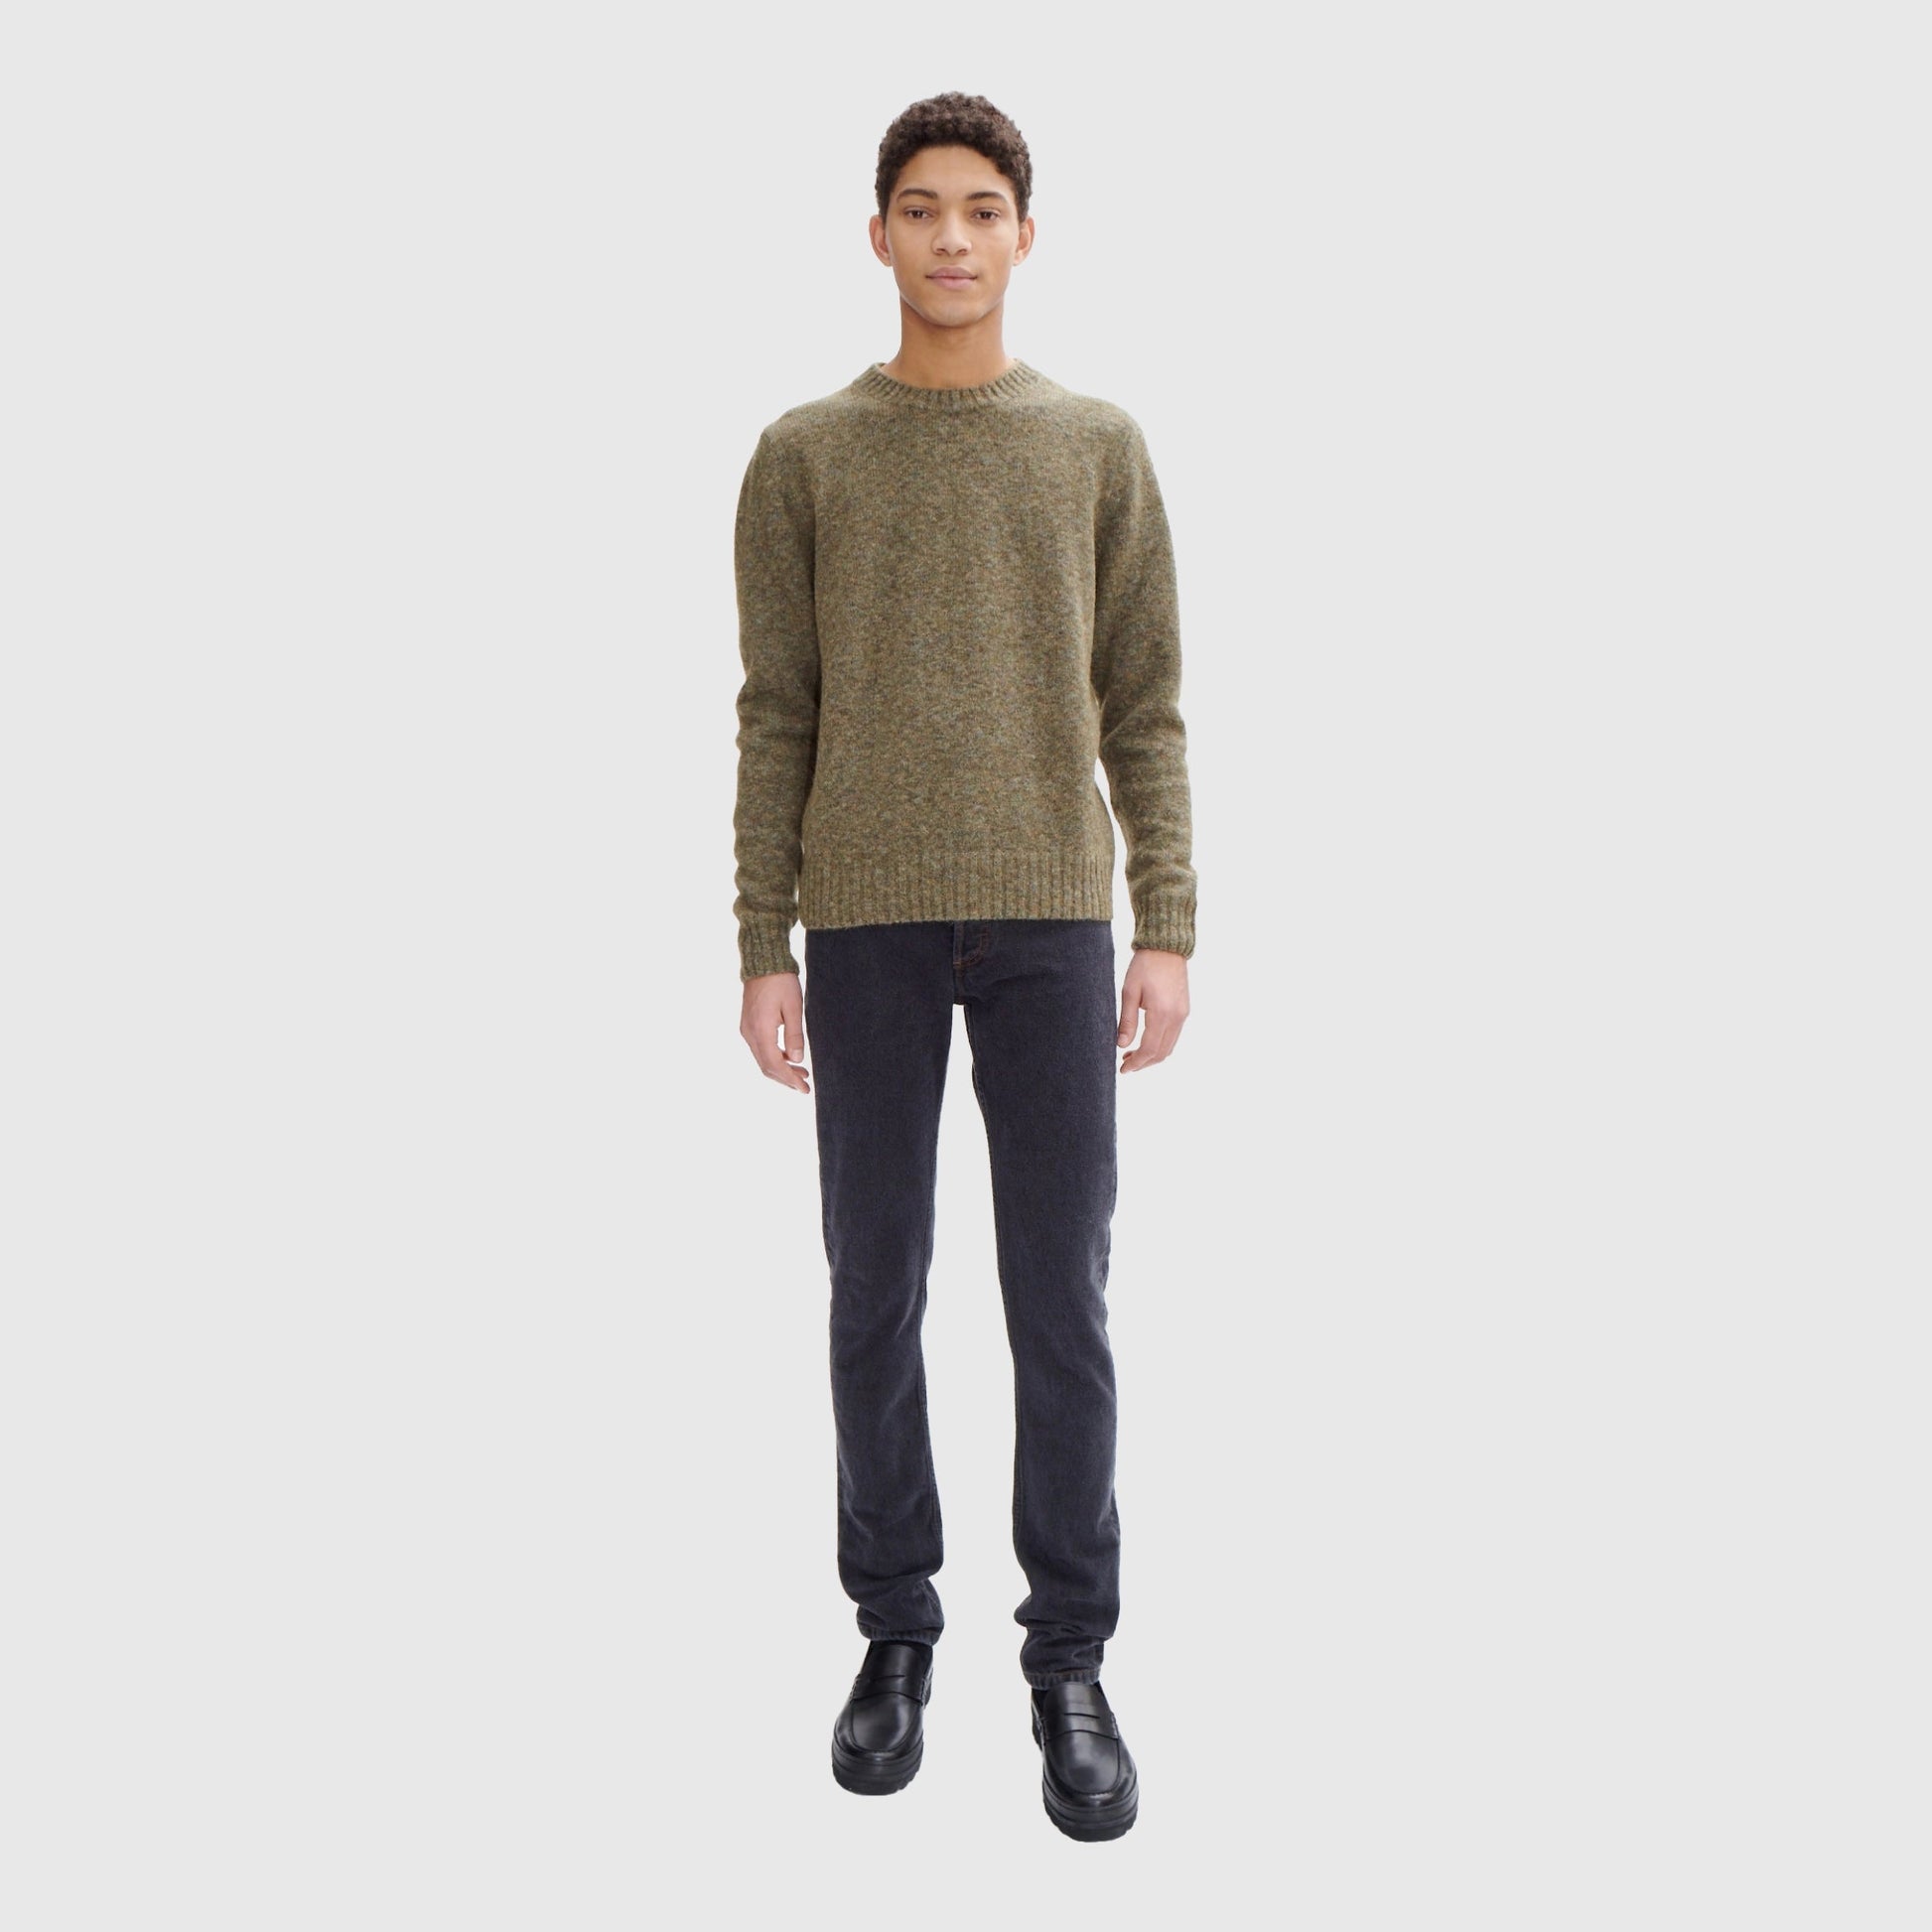 A.P.C. Lucas Pullover - Heathered Green Knitwear A.P.C. 